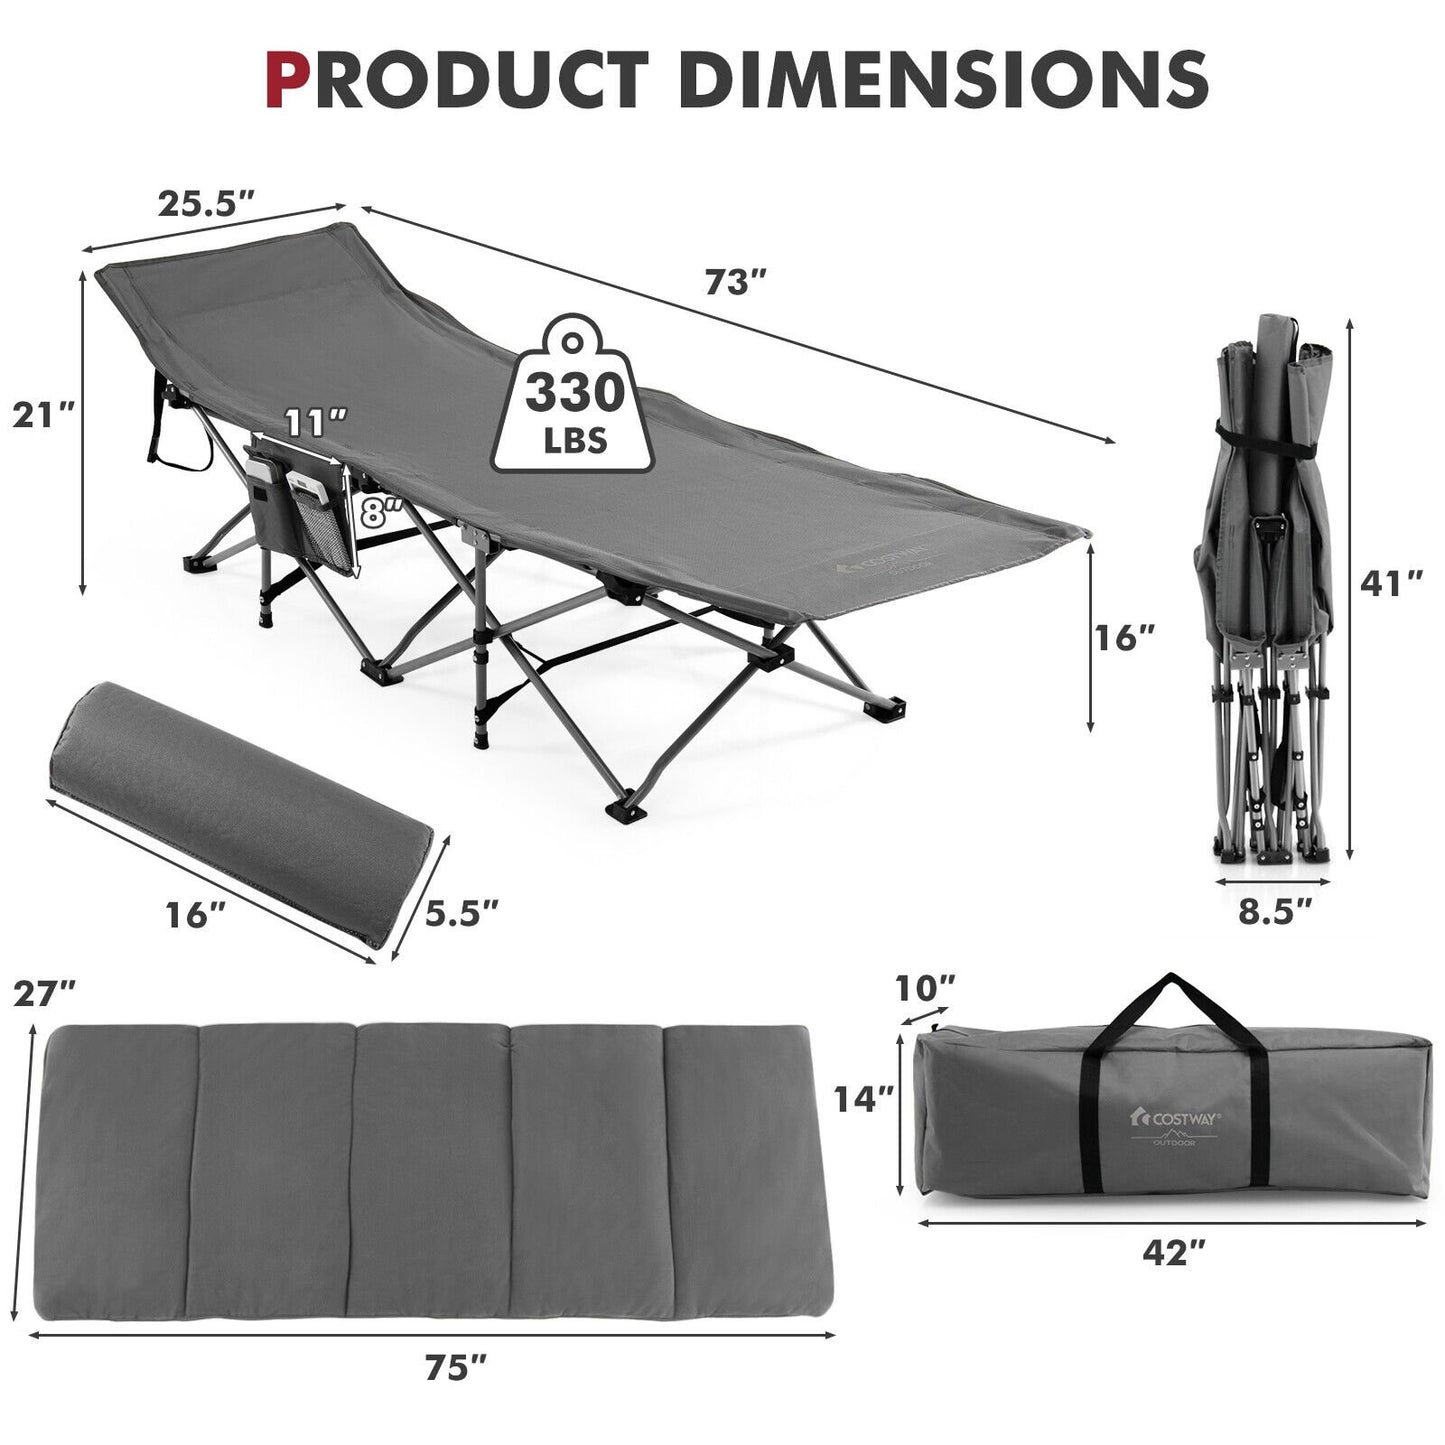 Folding Retractable Travel Camping Cot with Mattress and Carry Bag, Gray